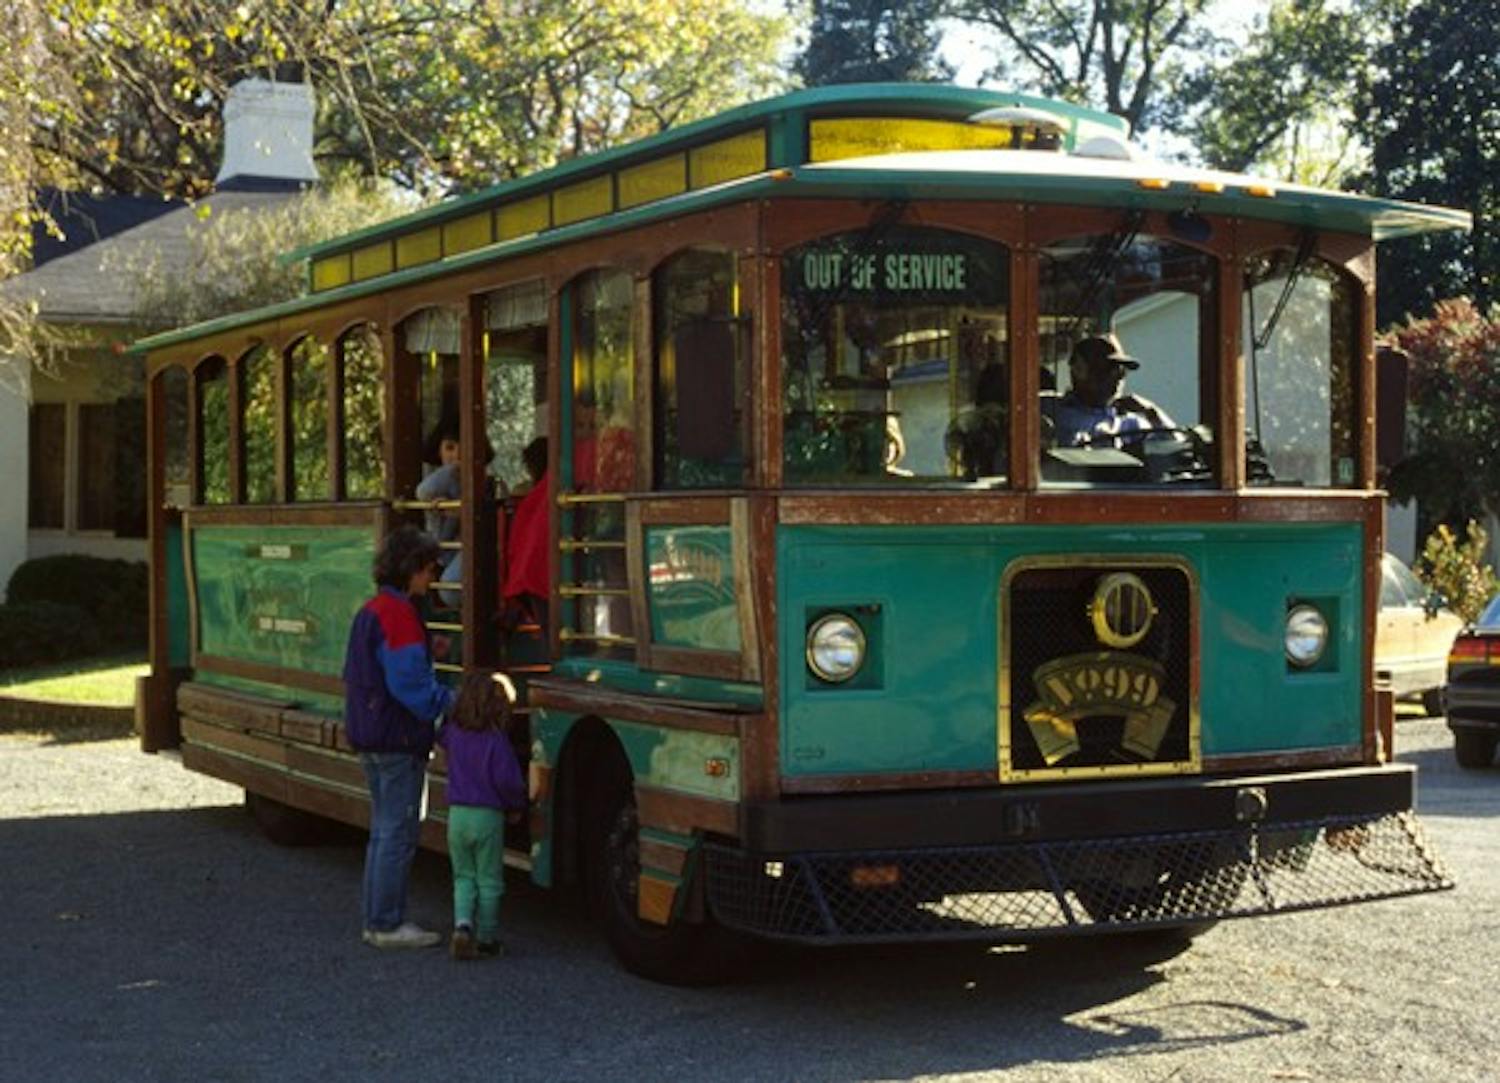 Chapel Hill ran two trolley-style buses in the late 80s and 90s. Courtesy of The Chapel Hill/ orange County Visitors Bureau